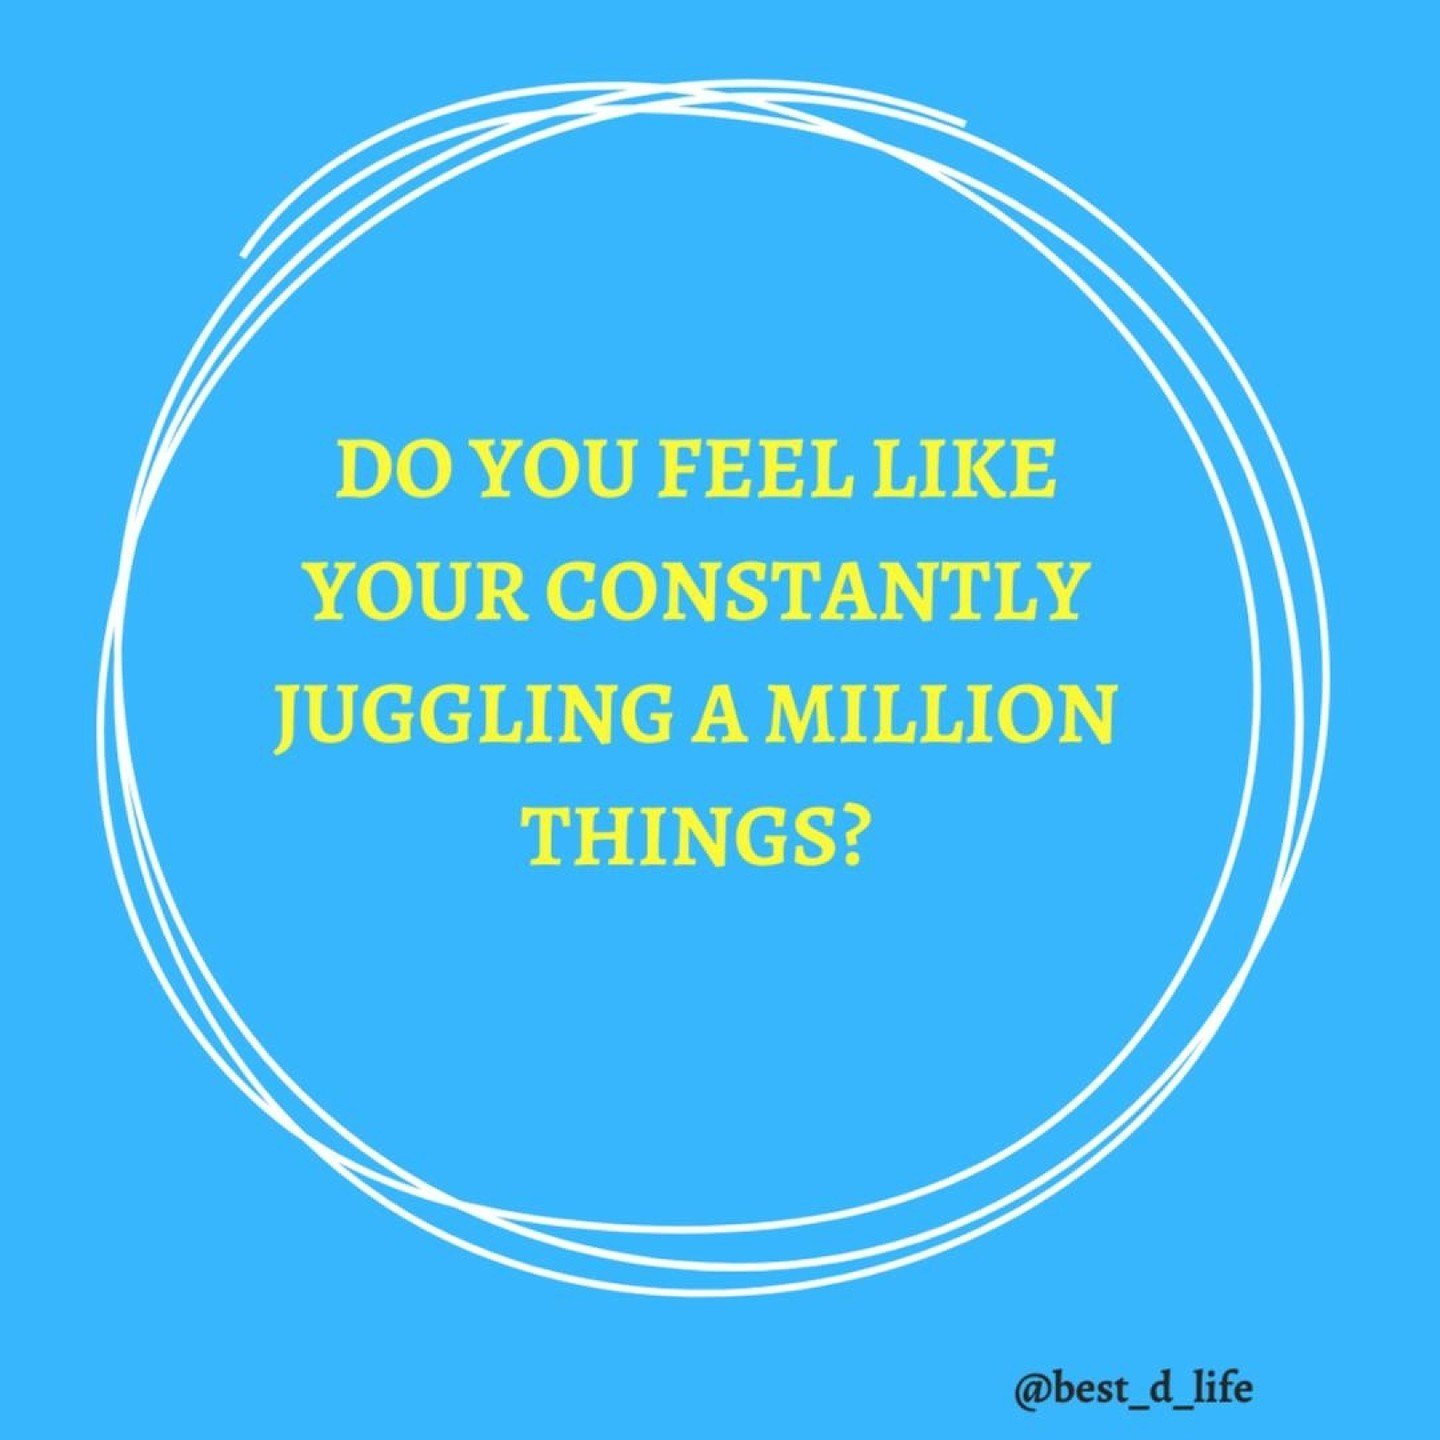 it can be easy to feel like you're constantly juggling a million things.

But finding balance is about making choices that support both your personal and professional goals.

That may mean letting go of perfection, prioritizing your time, or saying &